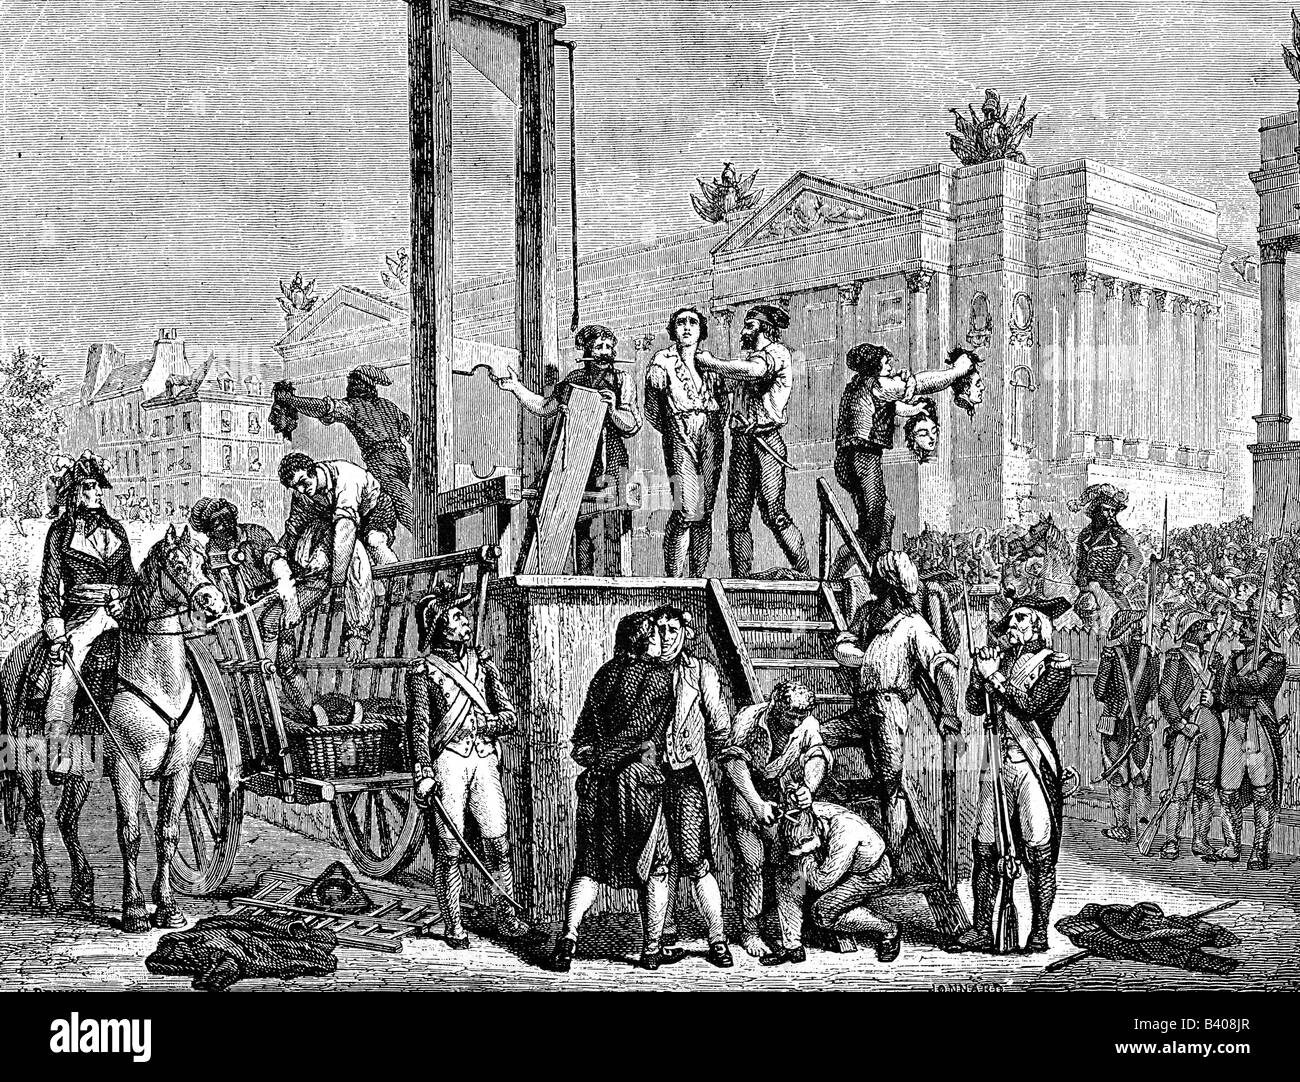 Robespierre, Maximilien de, 6.5.1758 - 28.7.1794, French politician, his execution with the Guillontine, Place de la Revolution, 28.7.1794, wood engraving von H. Renaud, 19th century, Stock Photo